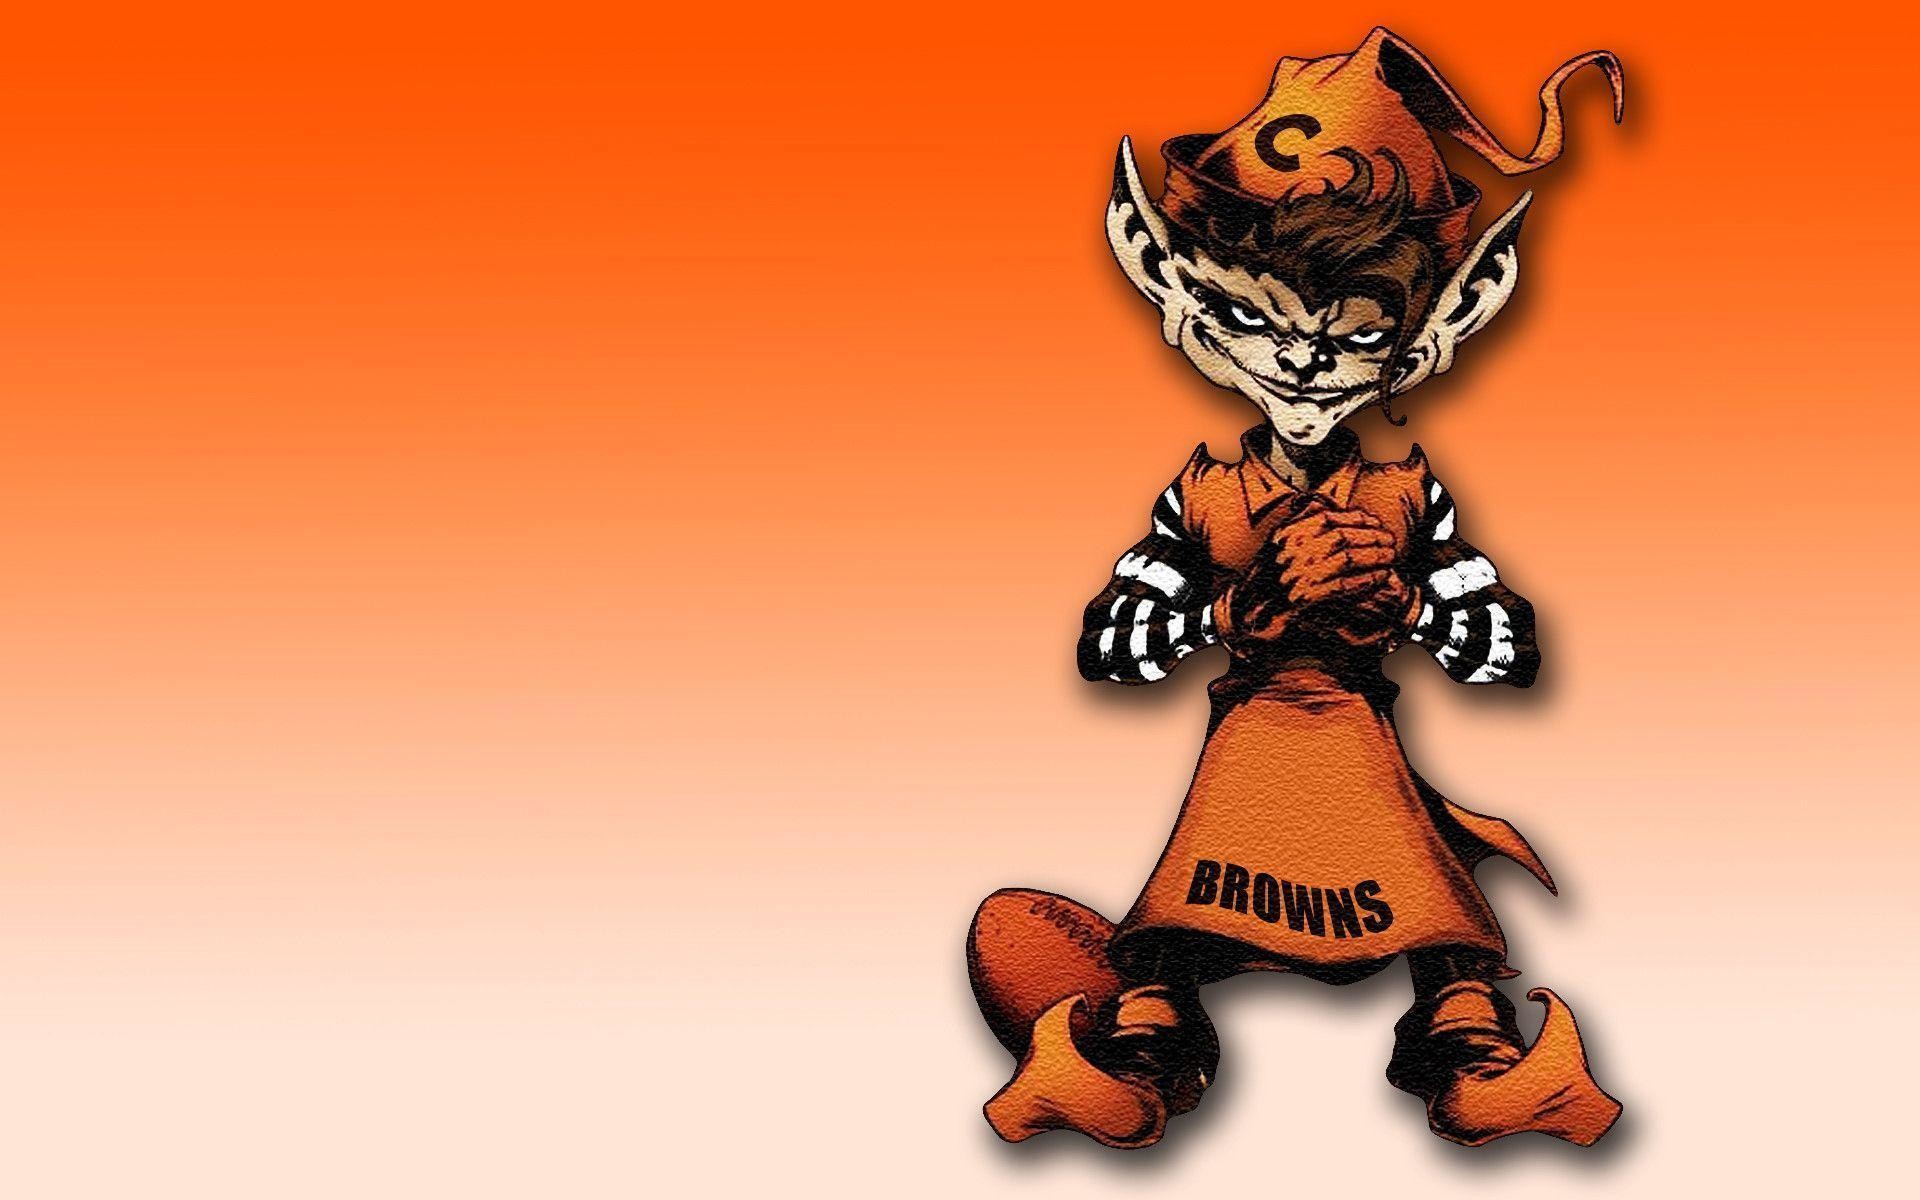 Cleveland browns wallpaper by TCB2177  Download on ZEDGE  9b7a